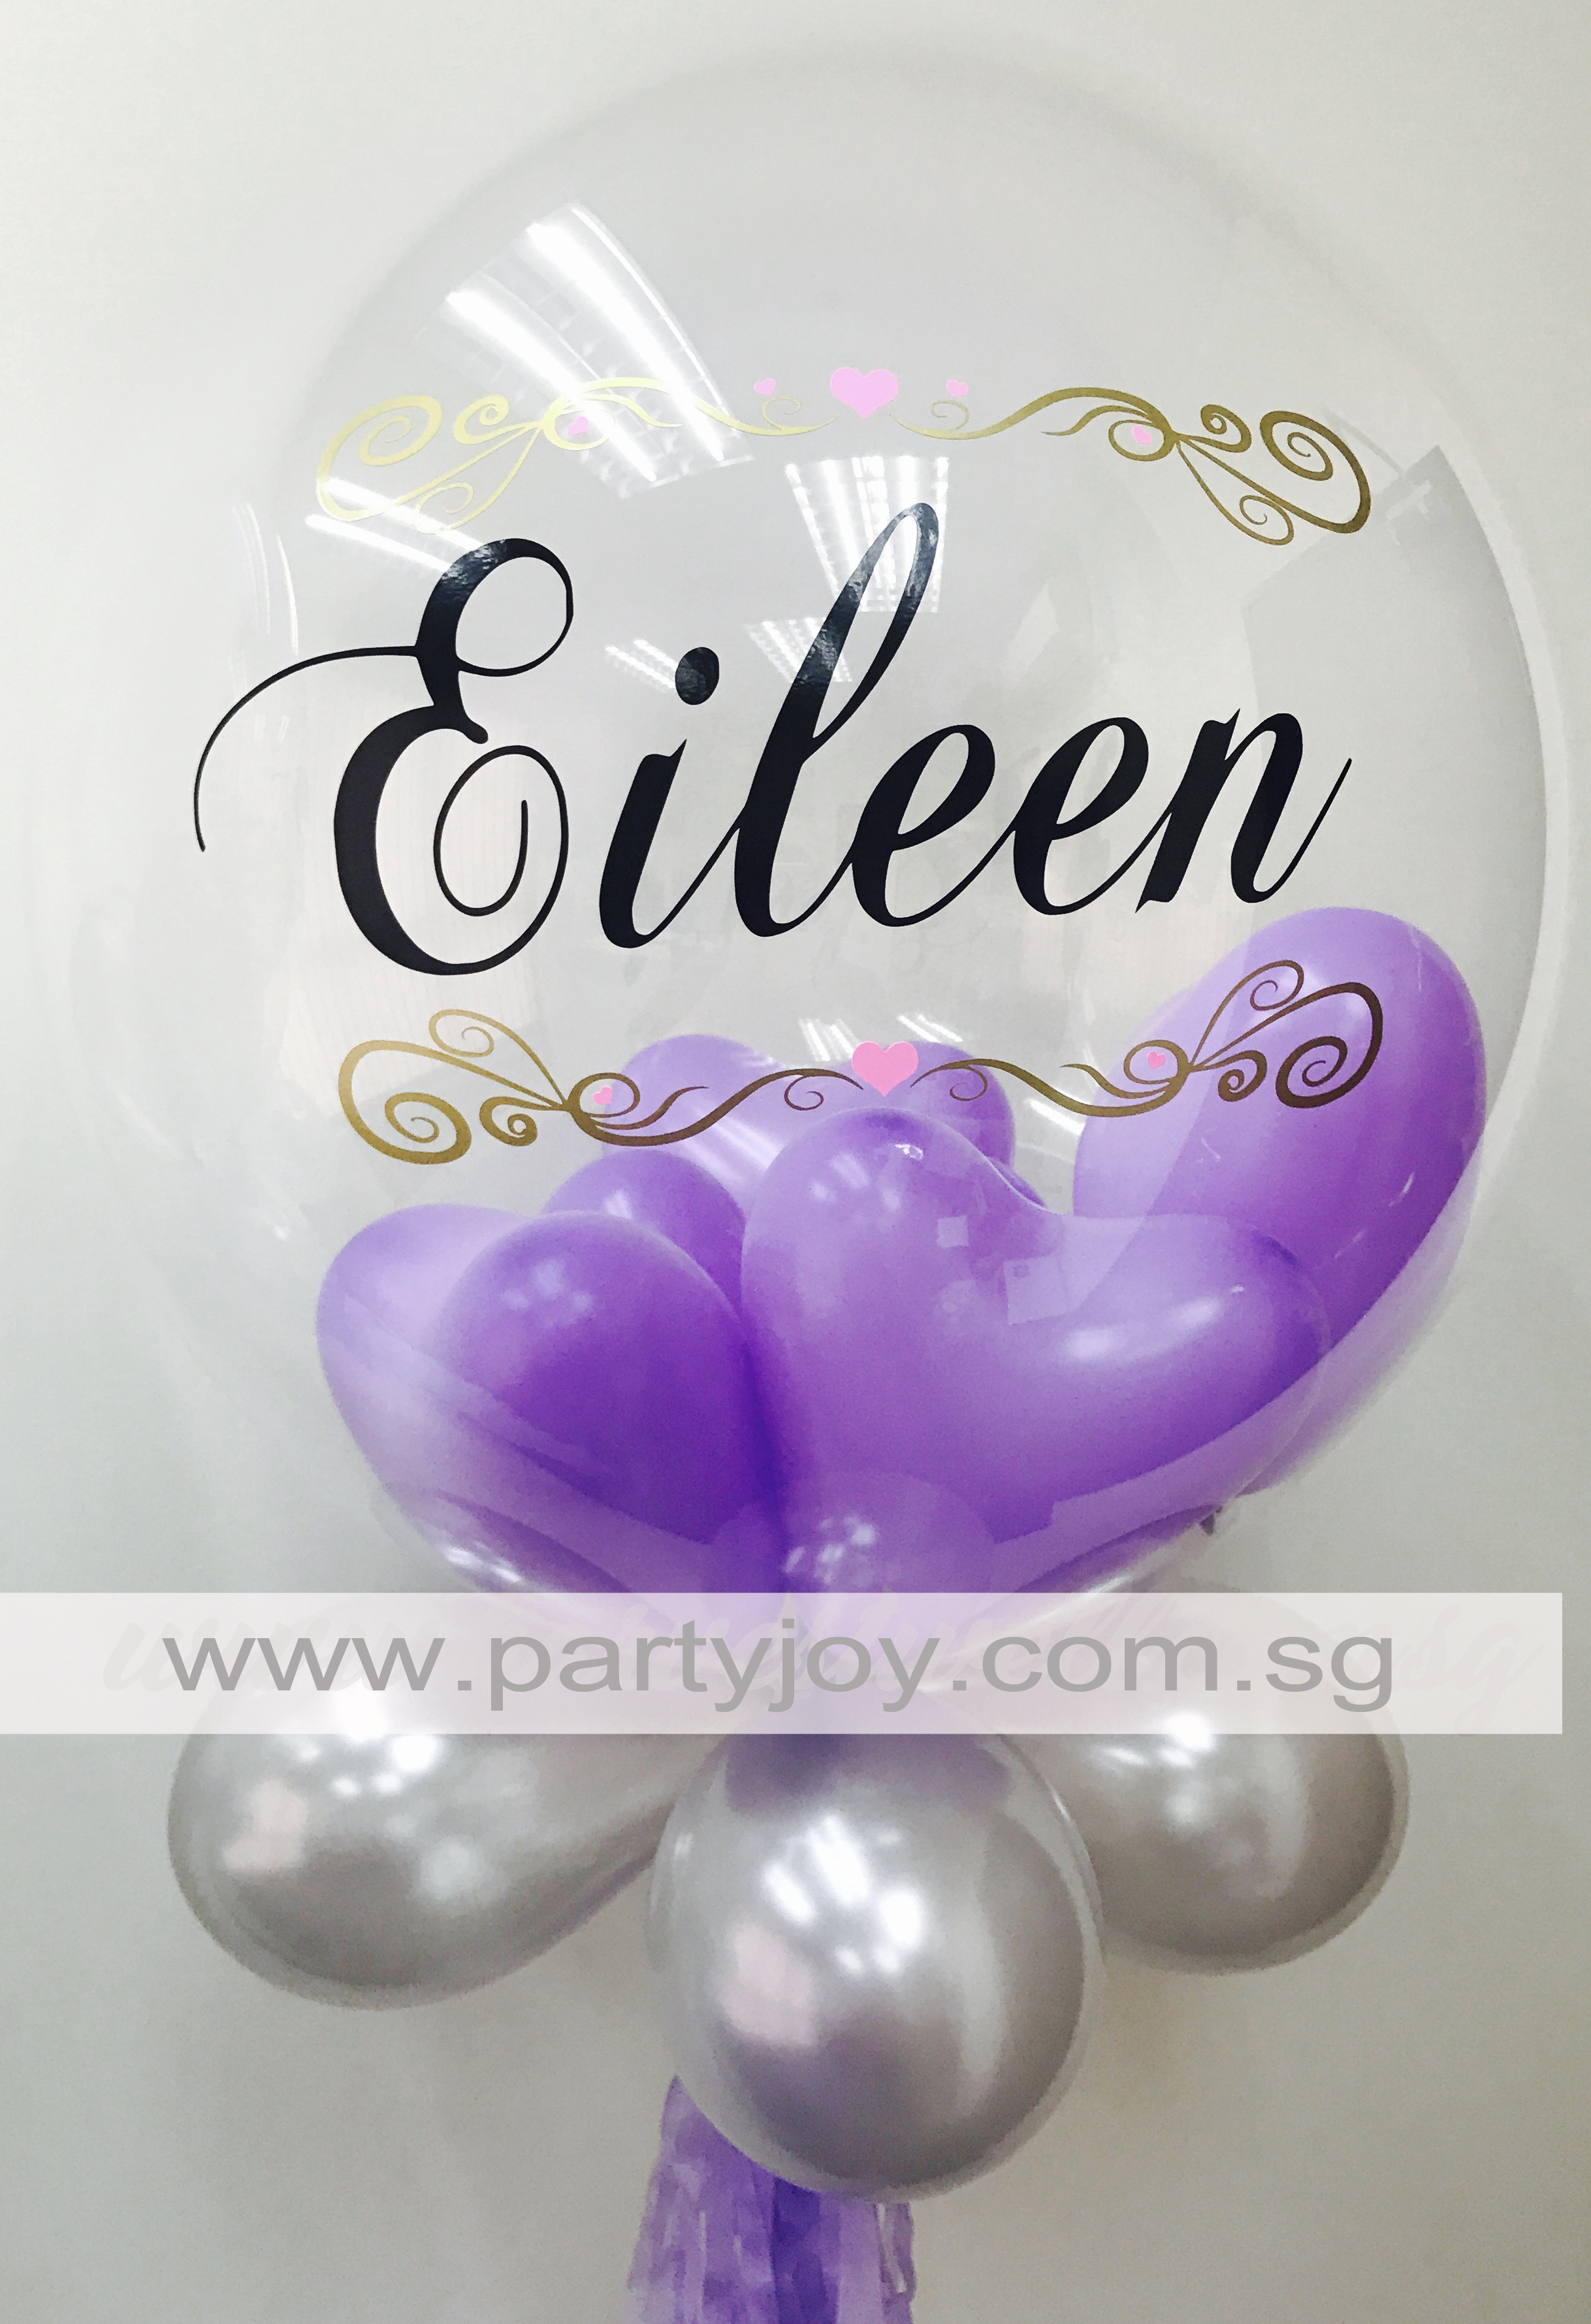 Just Name Customized Print on Bubble Balloon